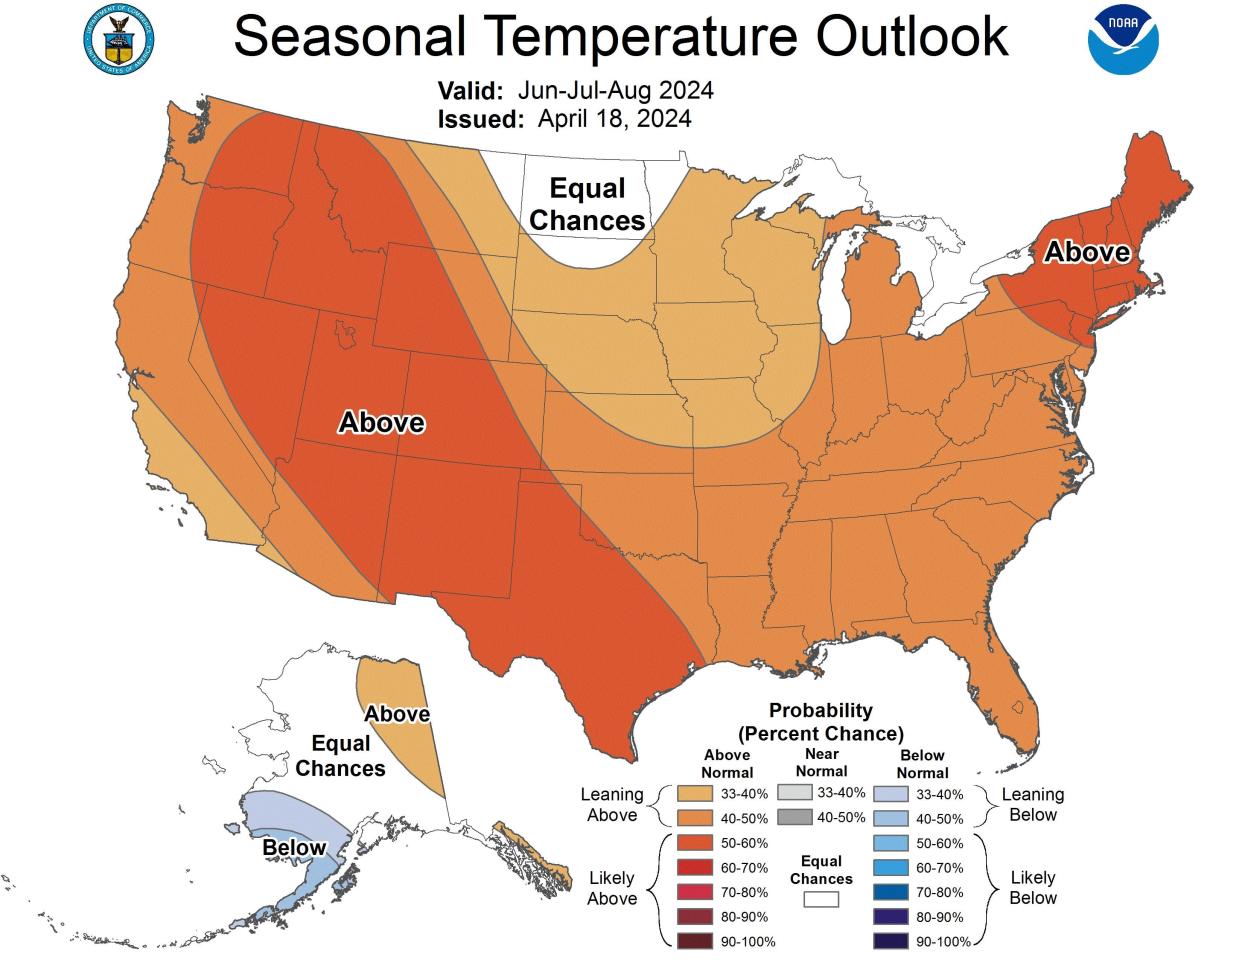 The summer forecast map for the US shows that nearly the entire nation is expected to see above-average temperatures (shown in orange and red).